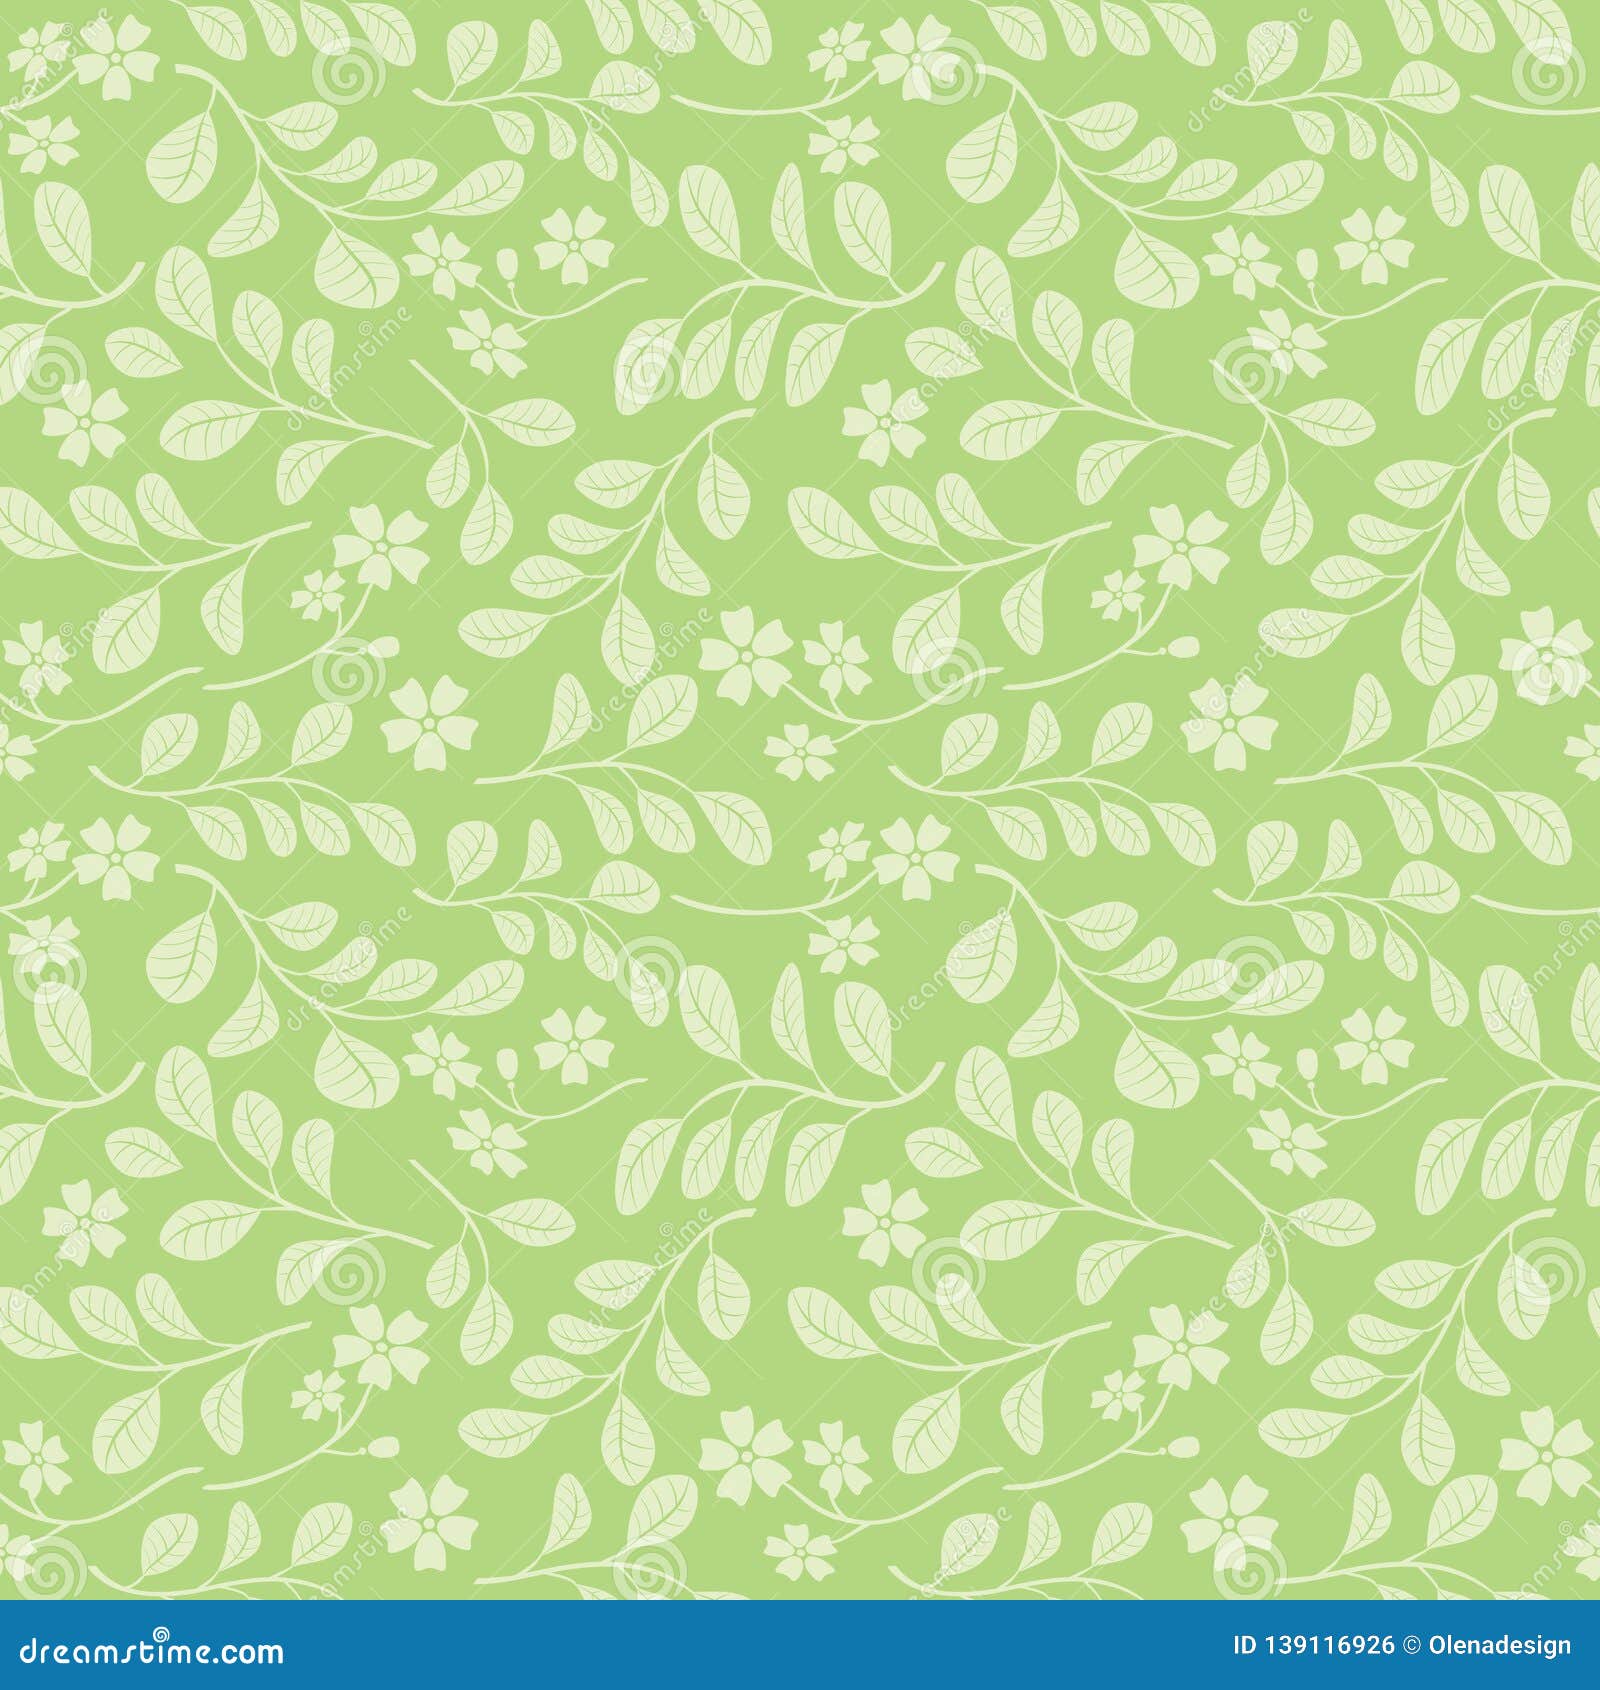 Light Green Leaves with Flowers on Bright Green Background - Seamless  Pattern Stock Vector - Illustration of nature, flower: 139116926